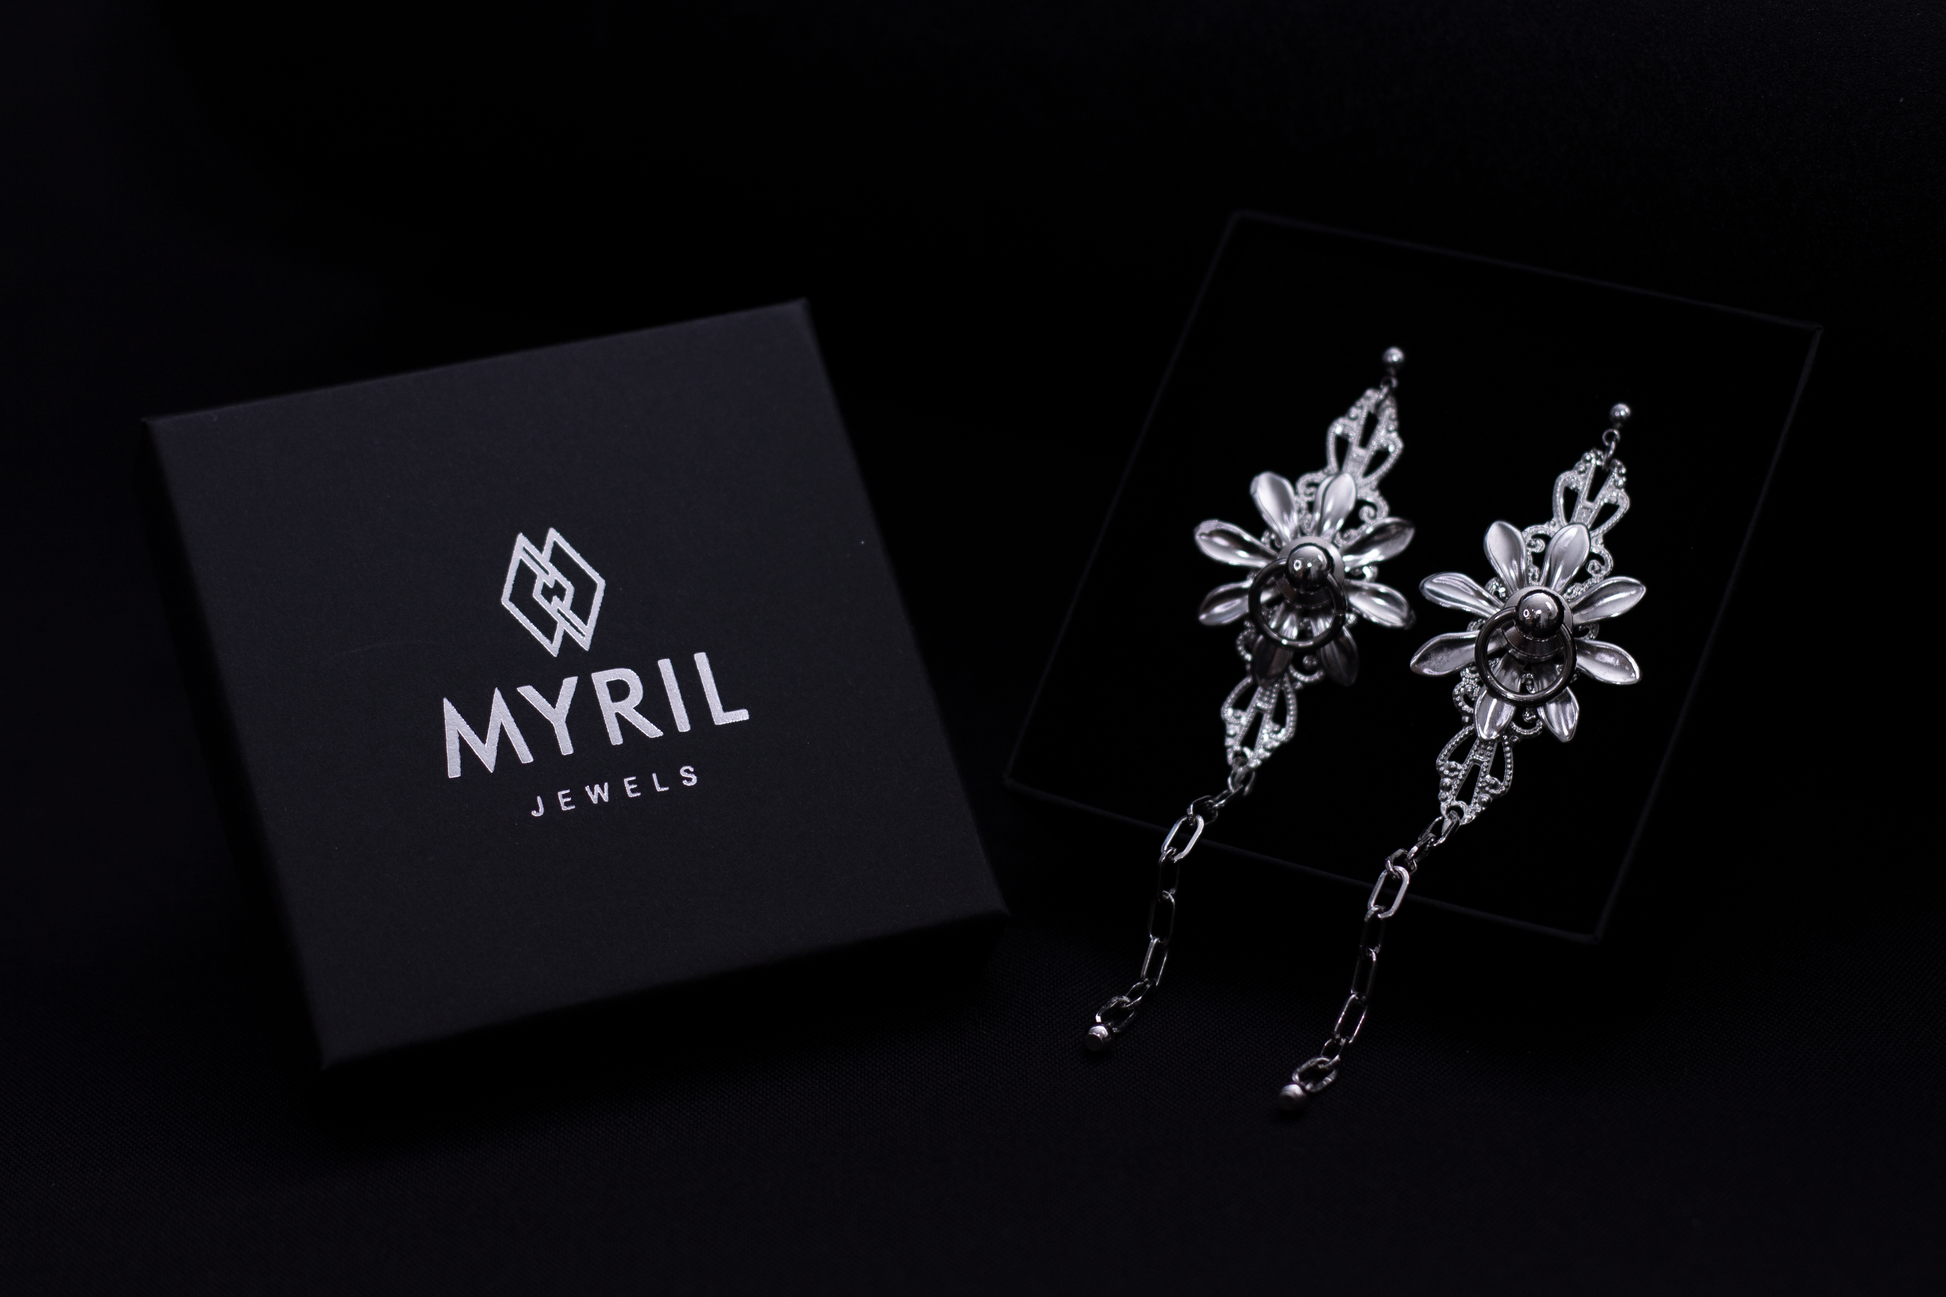 Neo-gothic floral earrings by Myril Jewels rest elegantly in their sleek packaging, radiating dark avant-garde allure. These bold, handmade pieces feature intricate petals and a dramatic hanging chain, perfect for gothic-chic enthusiasts or as a statement Halloween or festival jewel. Ideal for goth girlfriend or friend gifts, they epitomize minimalist goth elegance for everyday wear or rave parties.